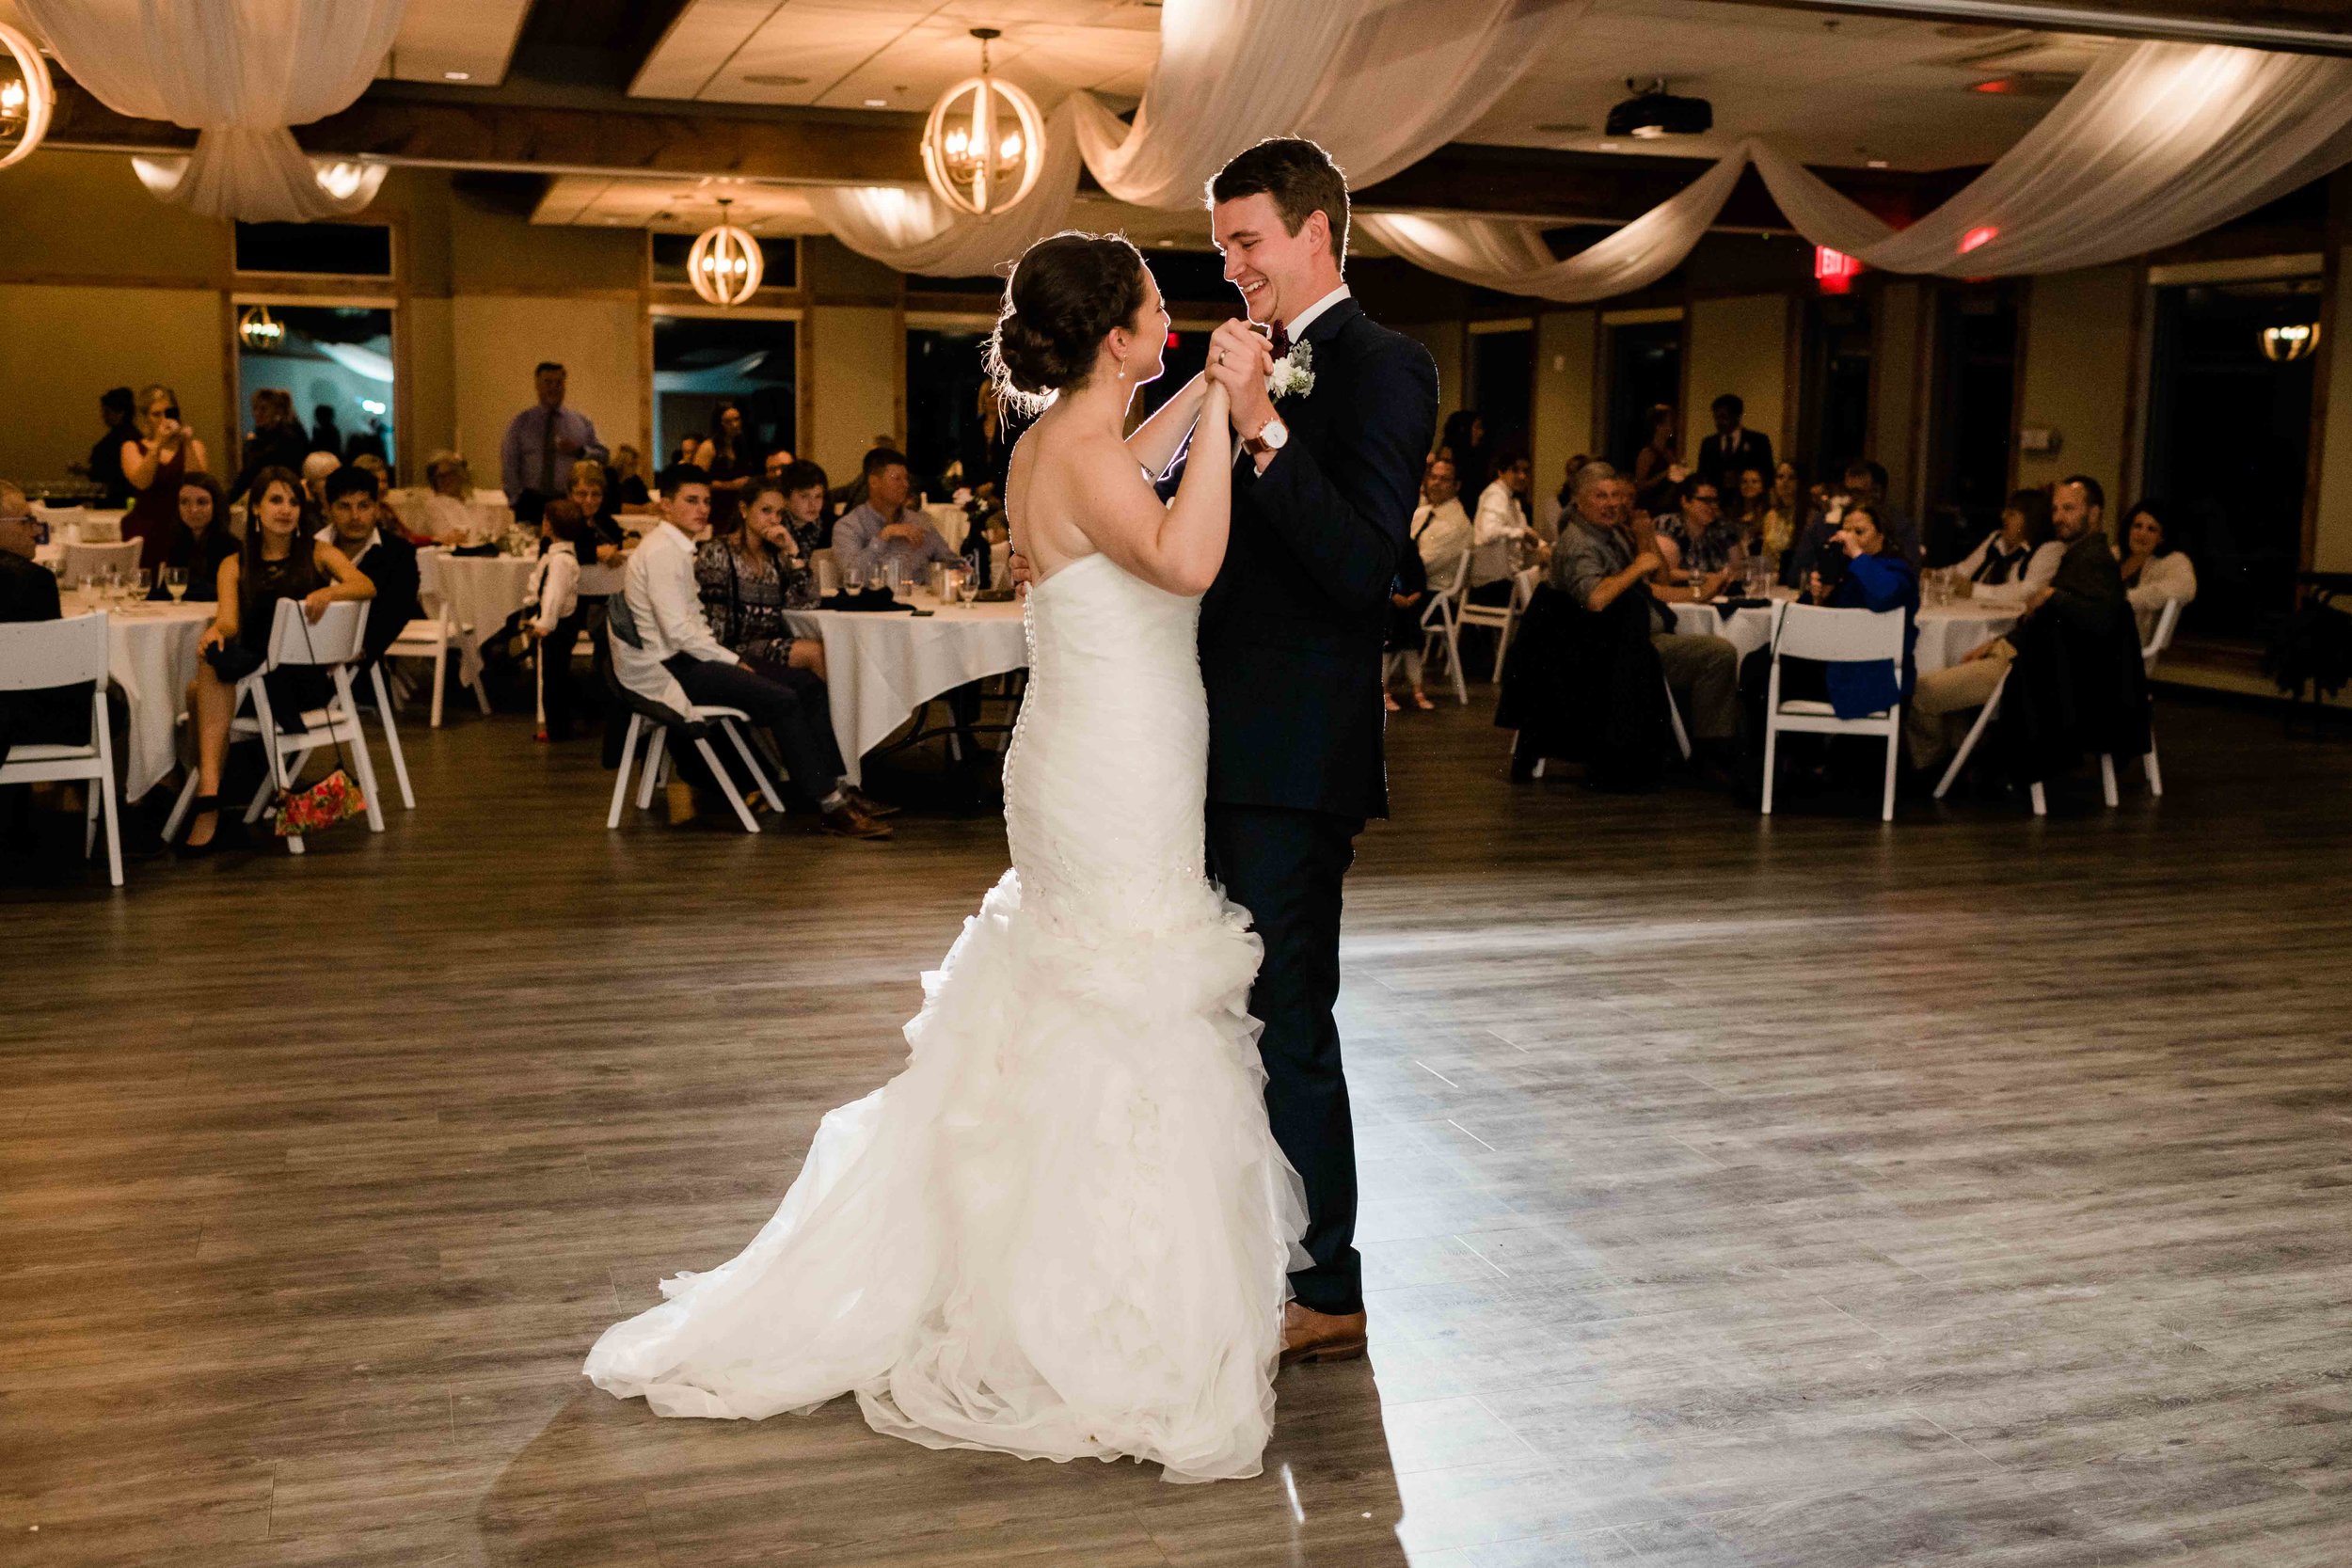 Bride and groom share their first dance as a married couple